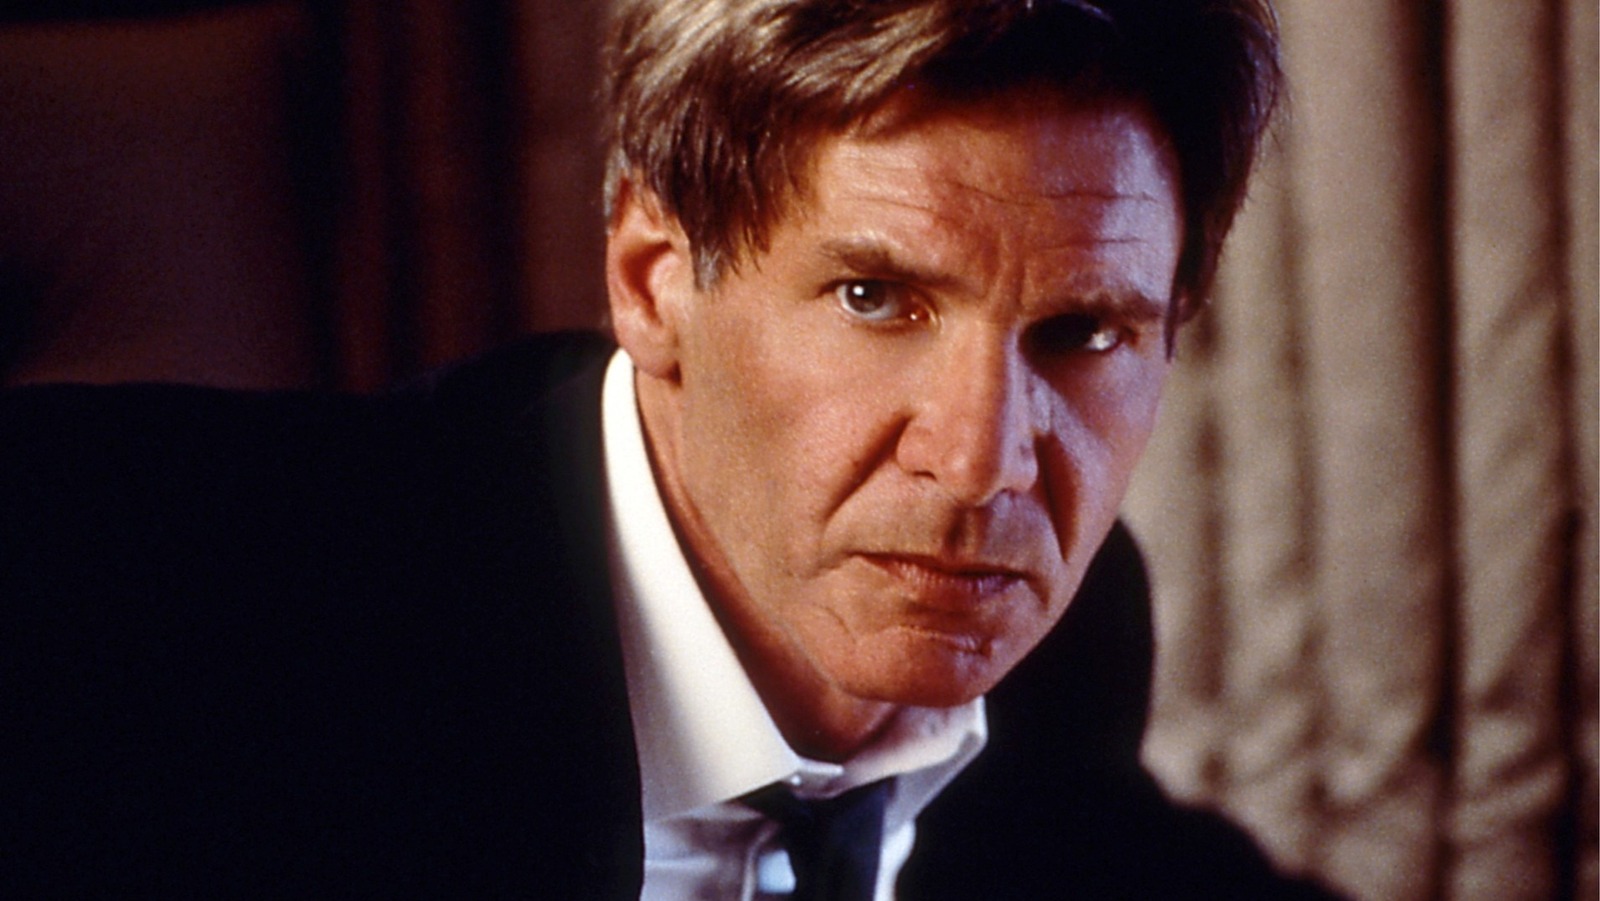 Harrison Ford didn't want Gary Oldman pulling punches during Air Force One